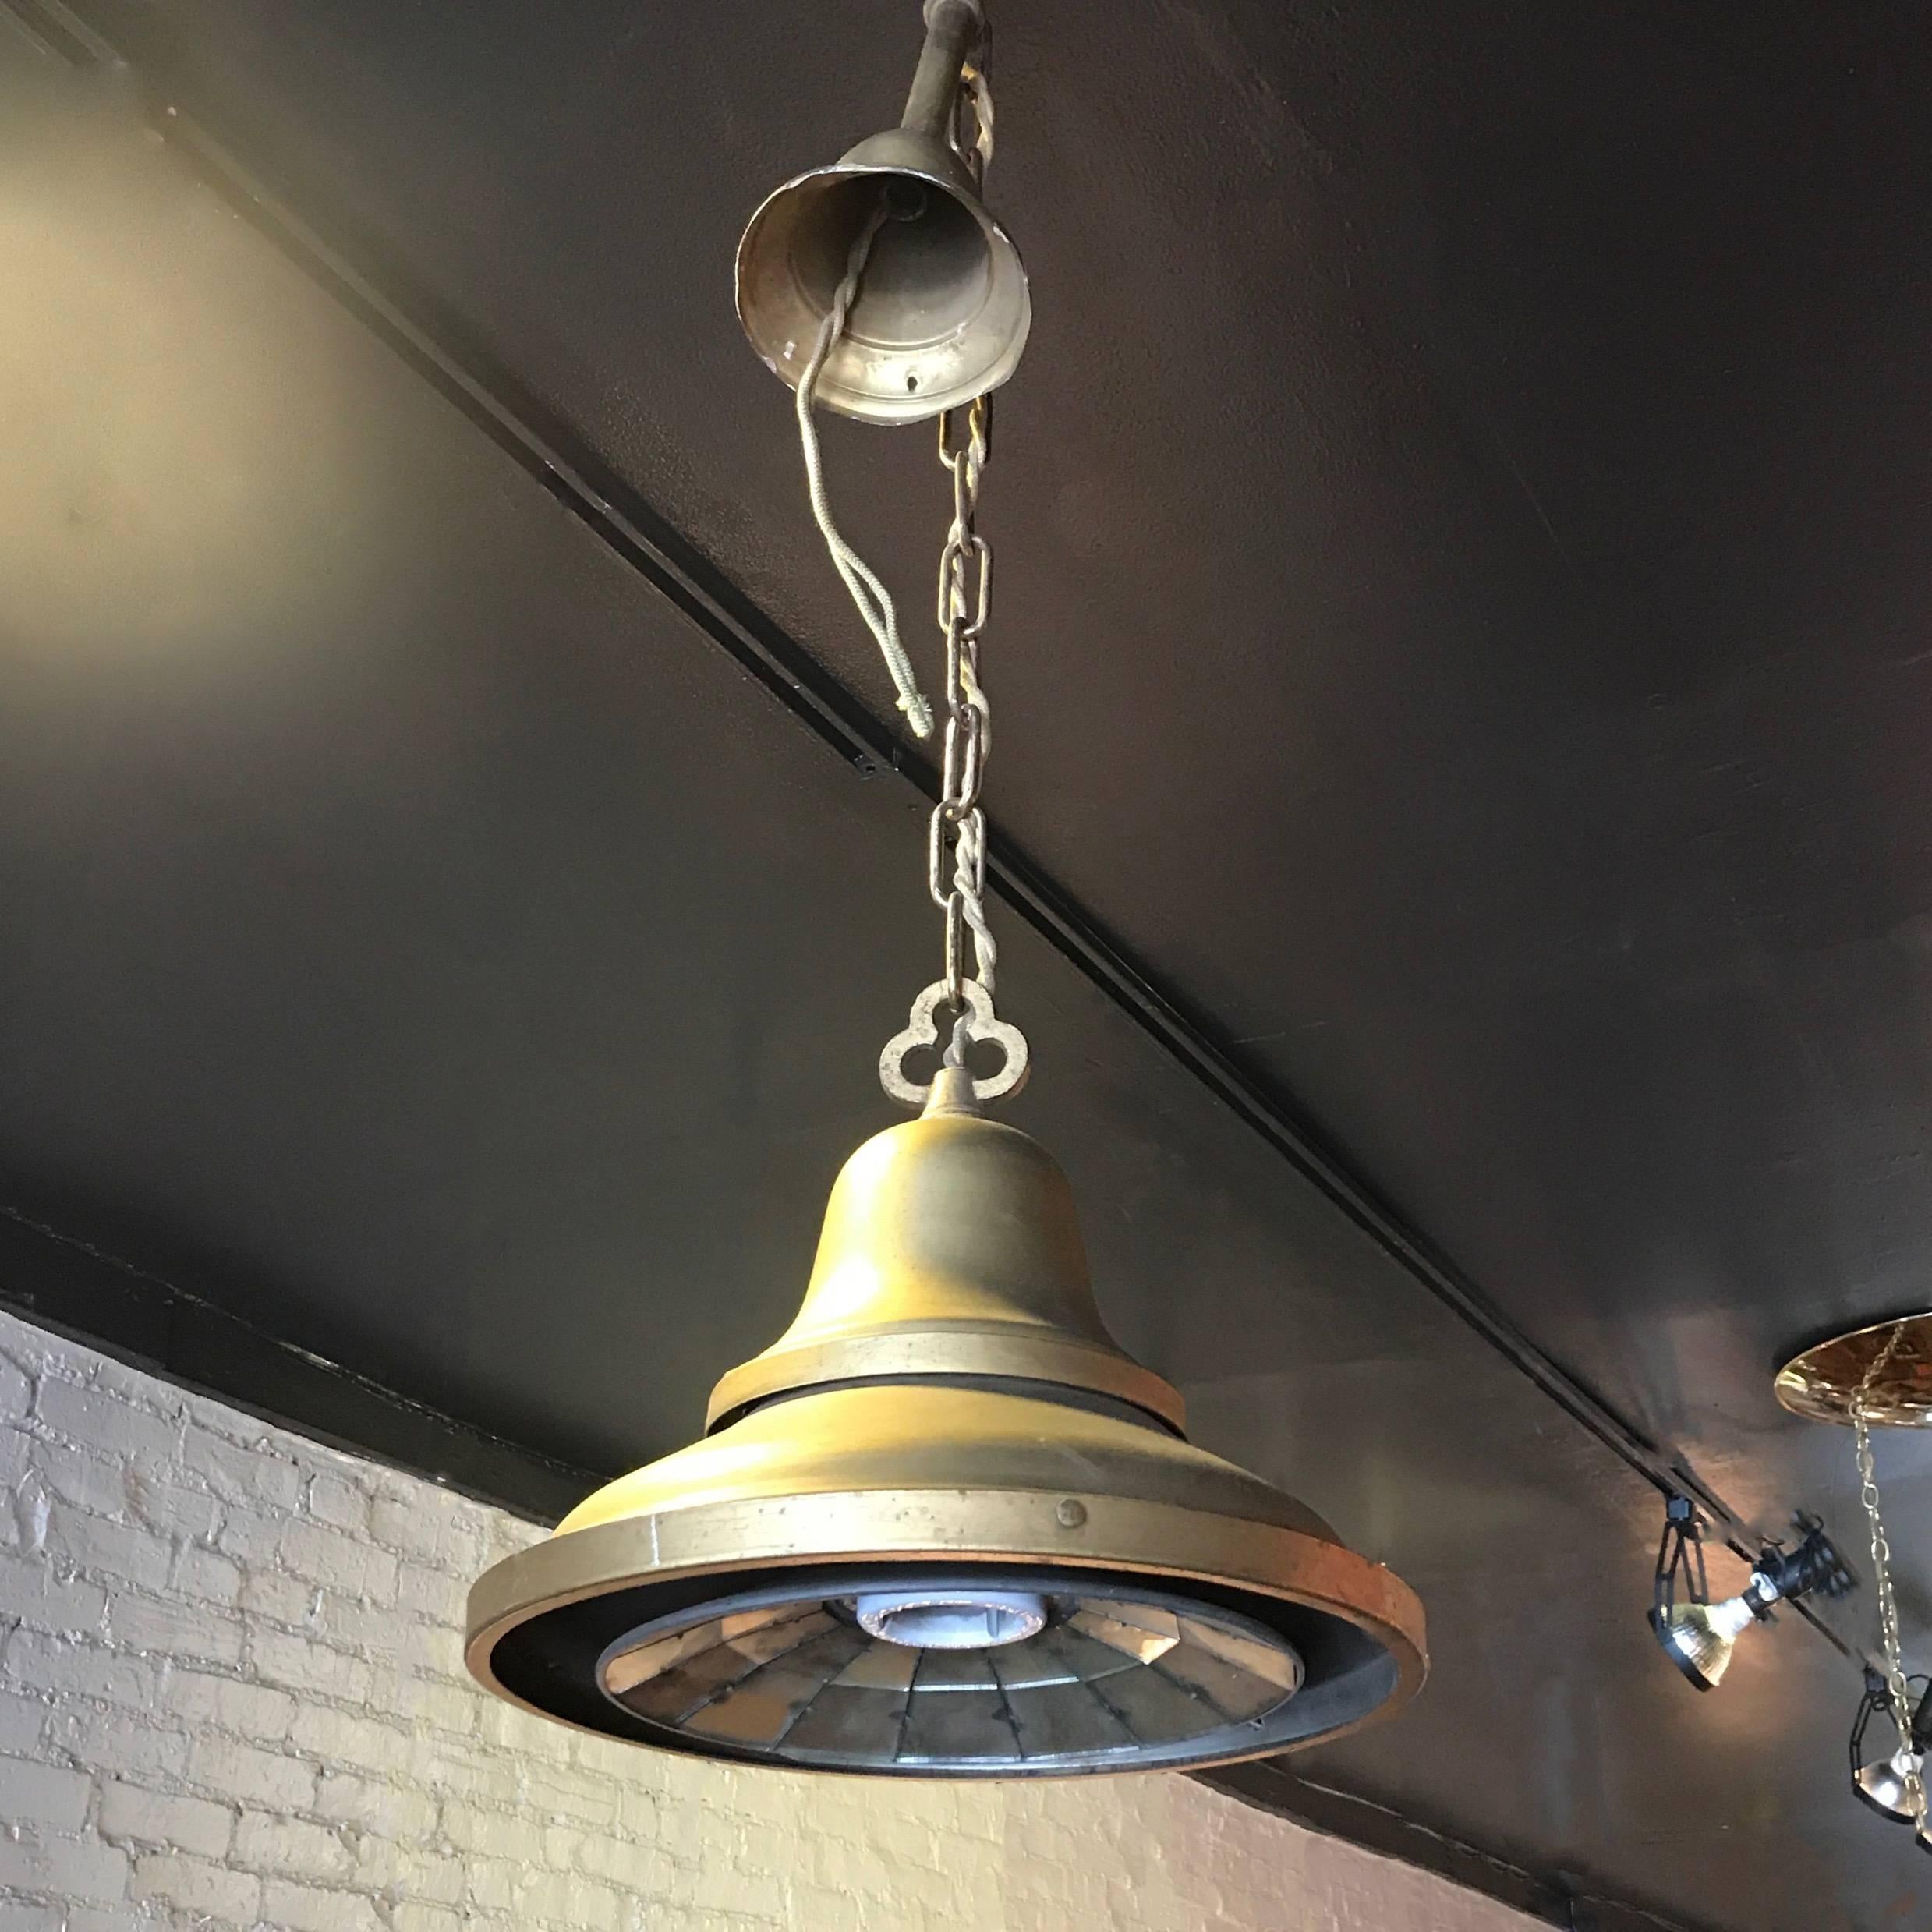 All original, 1920s, painted steel, factory pendant light features a dropped faceted mirror plate with porcelain socket with chain and canopy. The pendant is newly wired and can accept up to a 200 watt bulb. Overall height is 36 in.